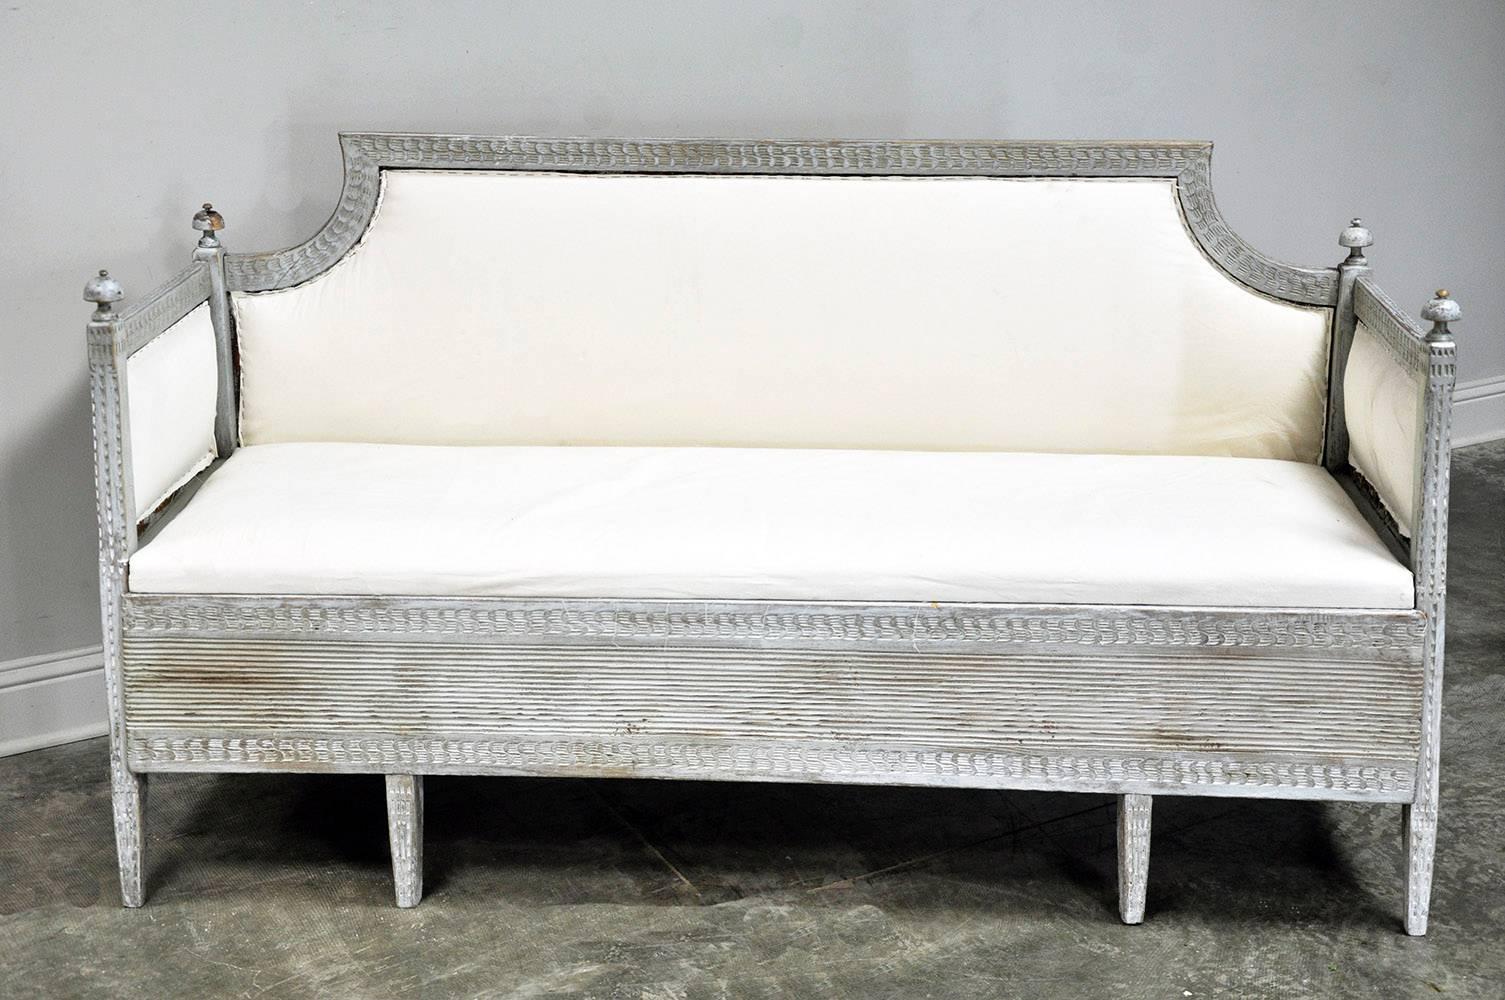 Classic Swedish daybed in Gustavian style with painted finish, upholstered in muslin. The primary wood is pine.

Established in 1979, Joyce Horn Antiques, Ltd. continues its 36 year tradition of being a family owned and operated business